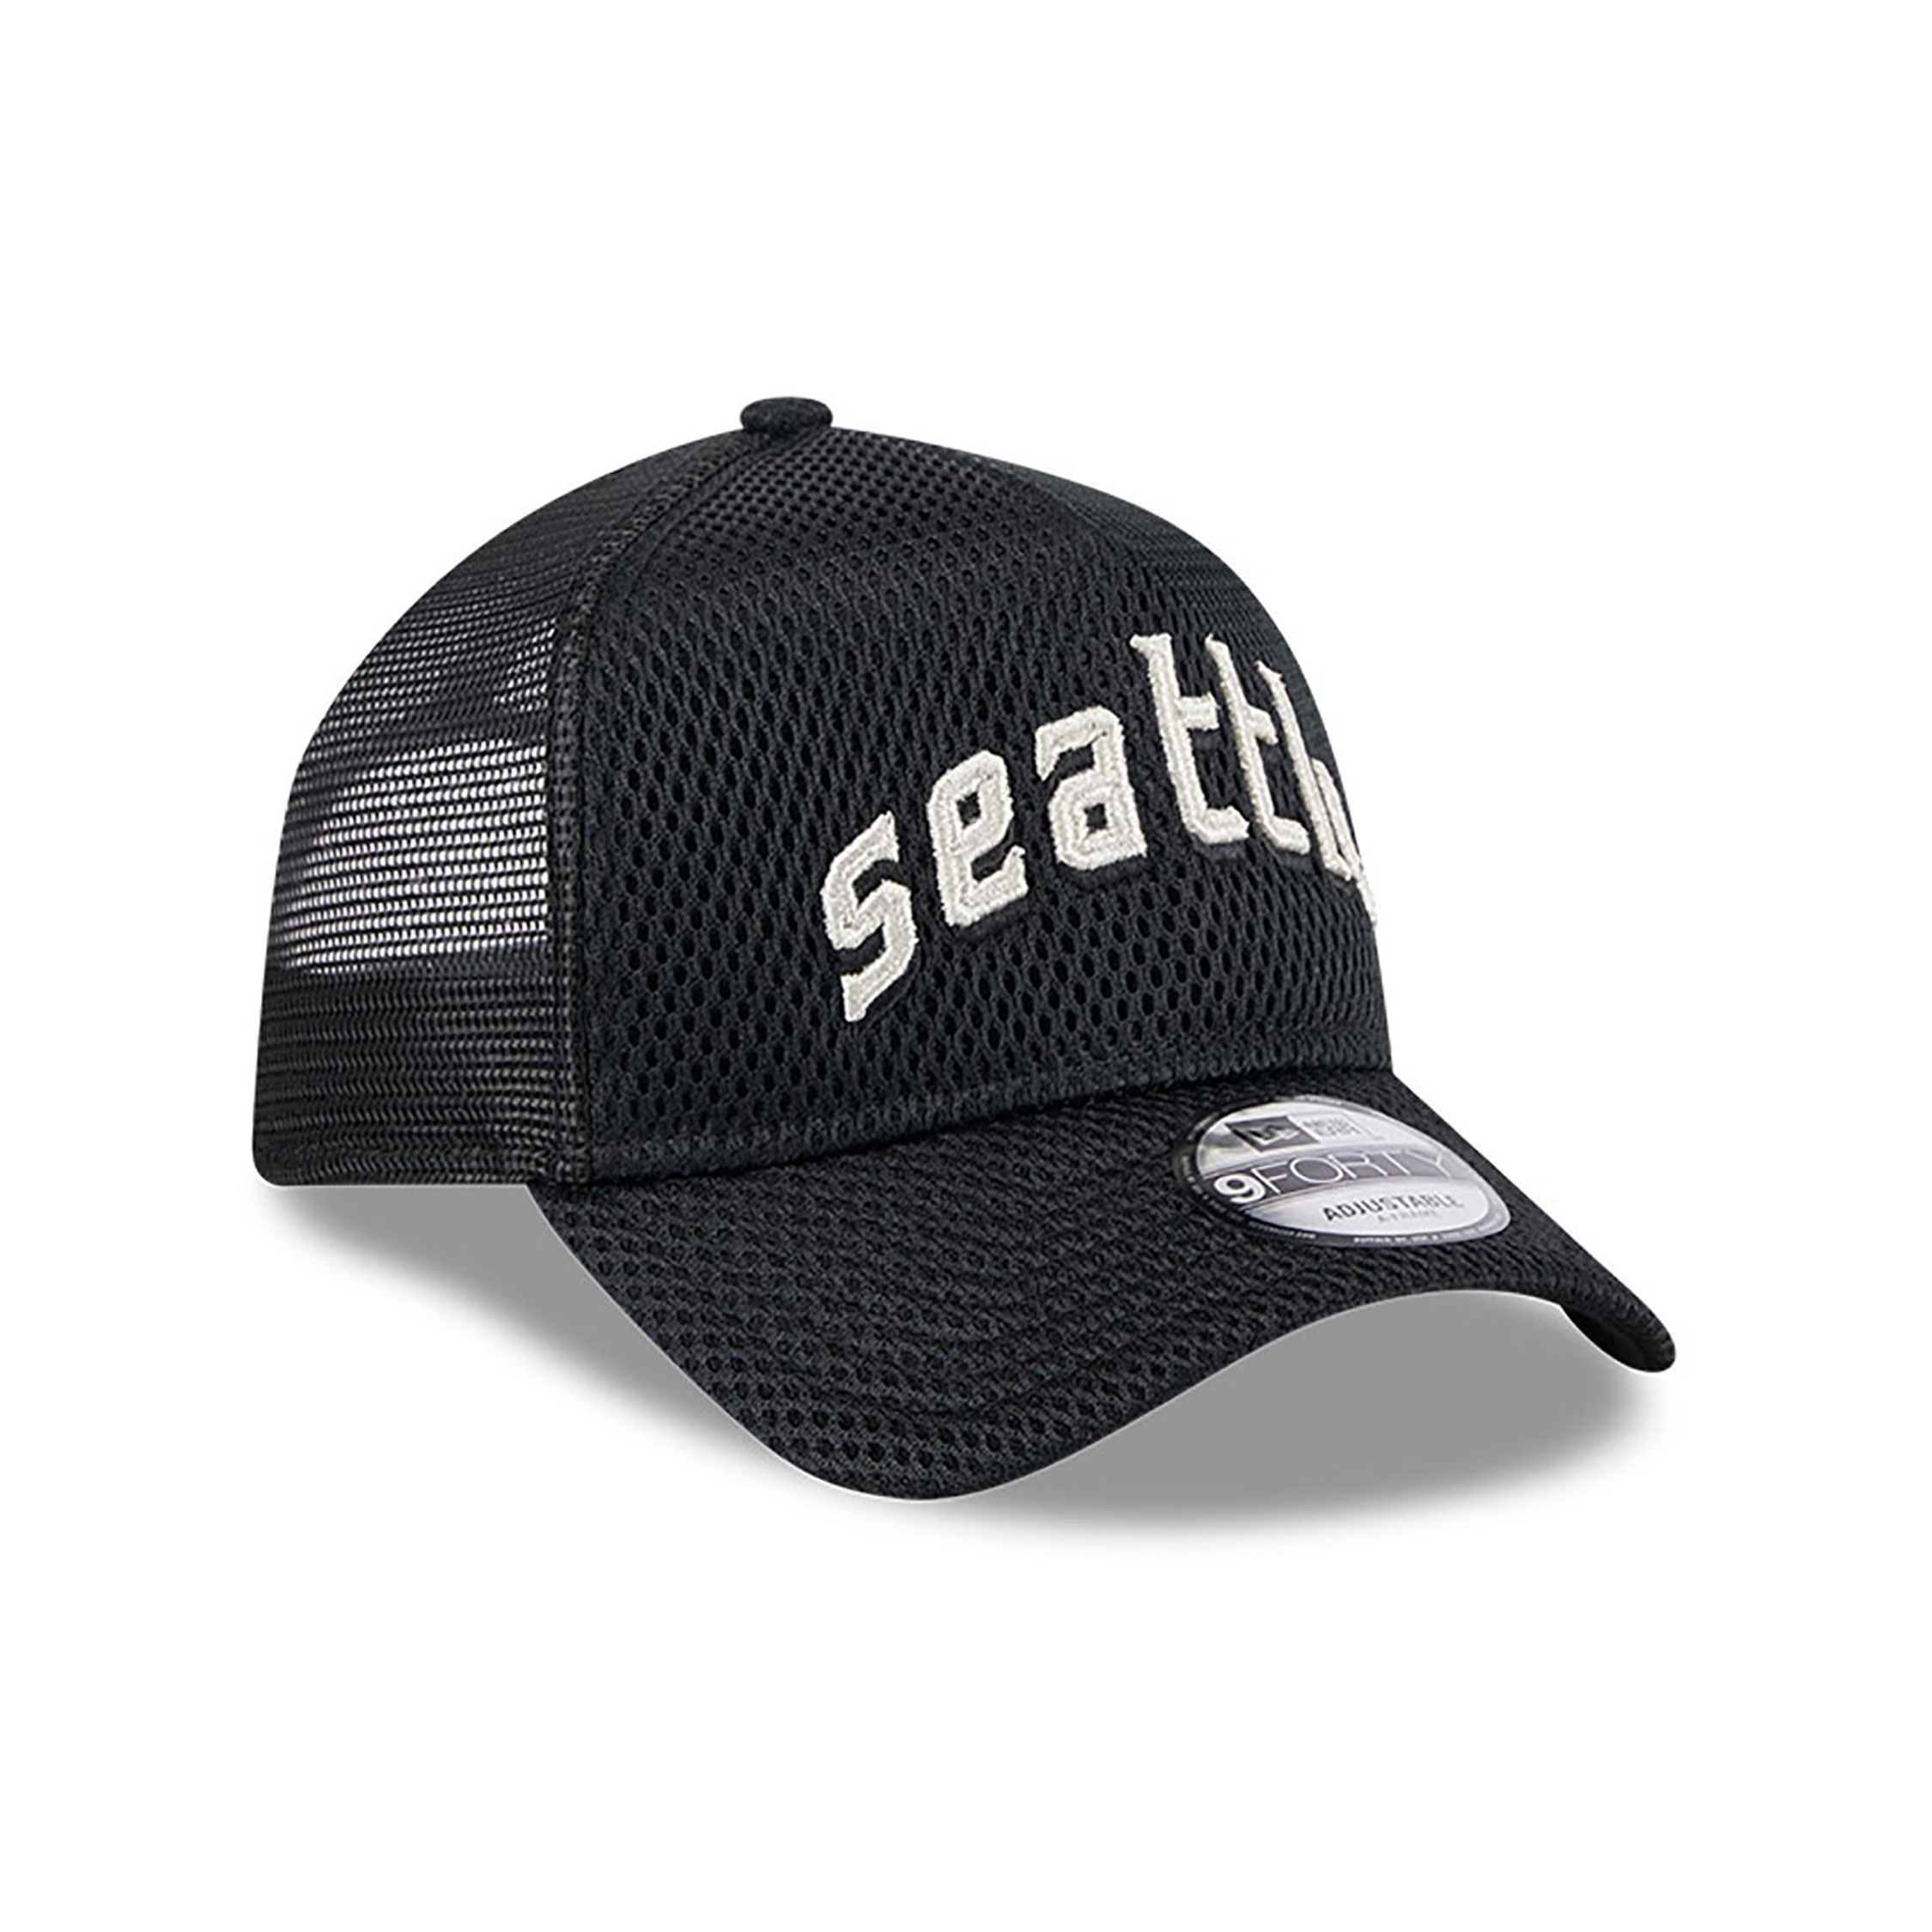 Seattle Mariners City Mesh Black 9FORTY A-Frame Adjustable Trucker Cap